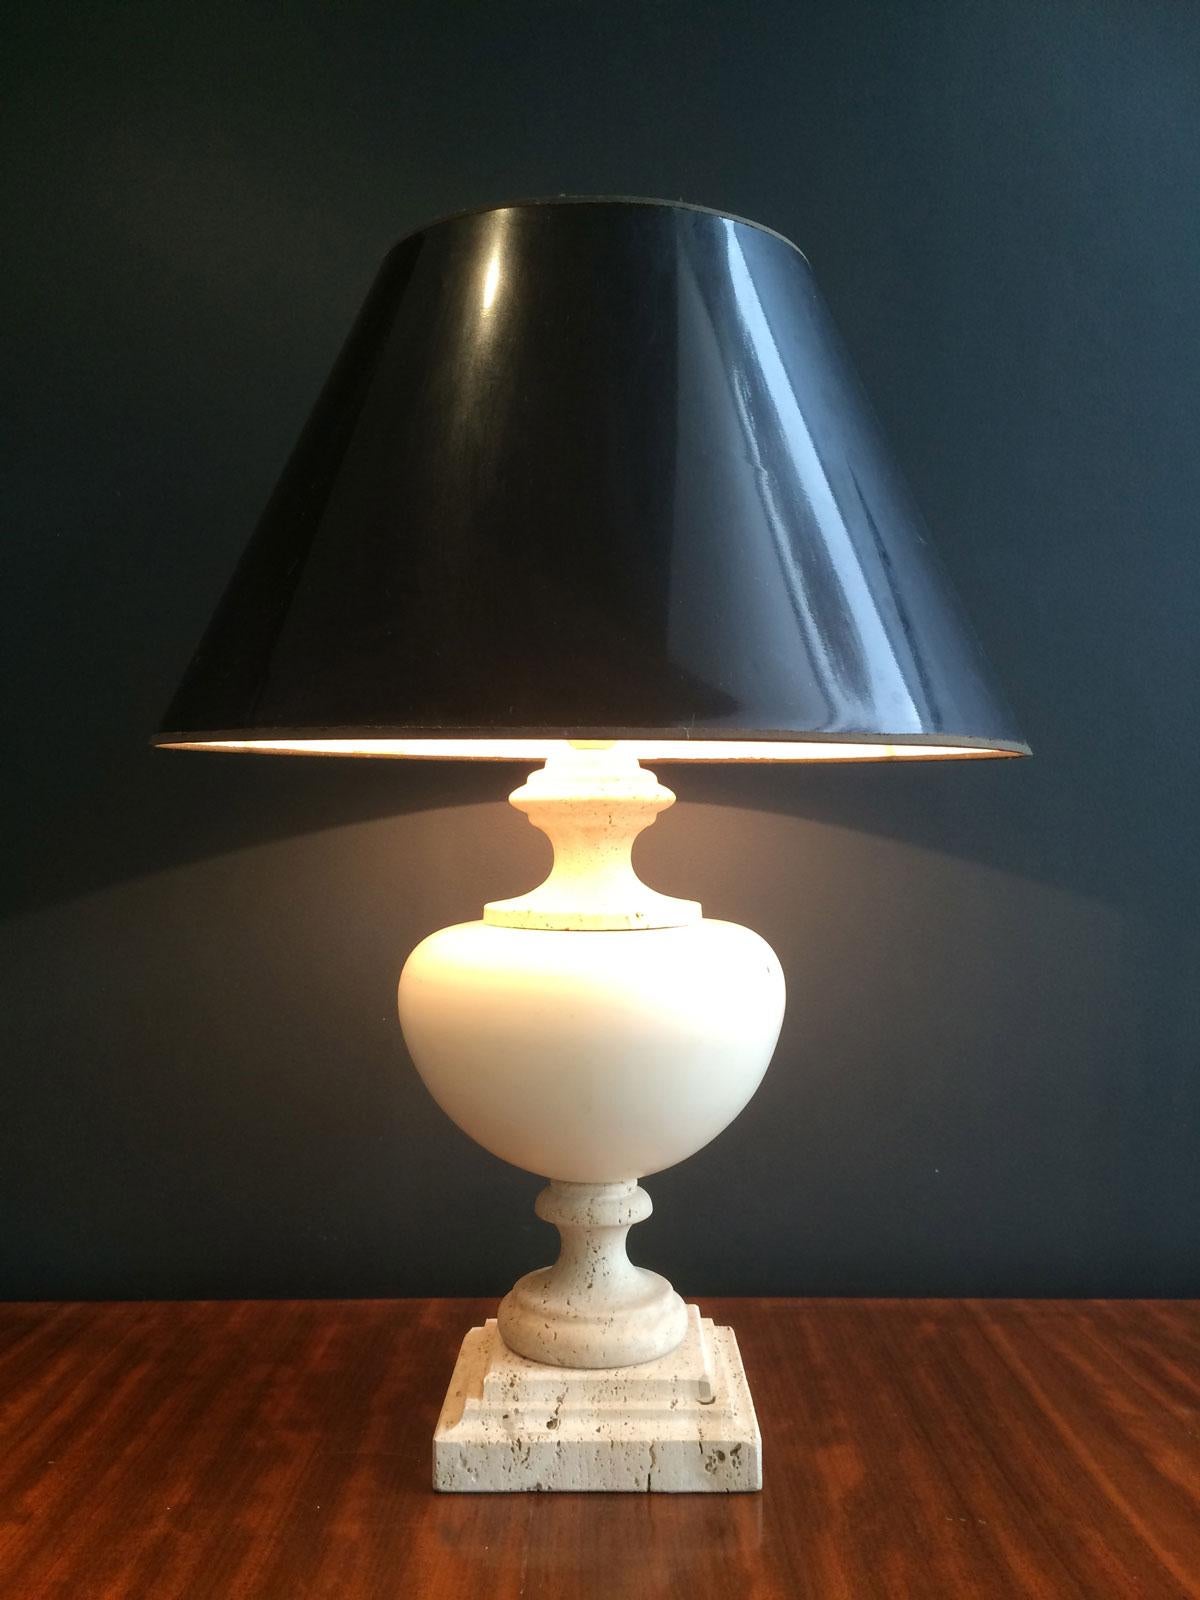 Mid-Century Modern Ceramic Table Lamp on a Travertine Base, French Work, Circa 1970 For Sale